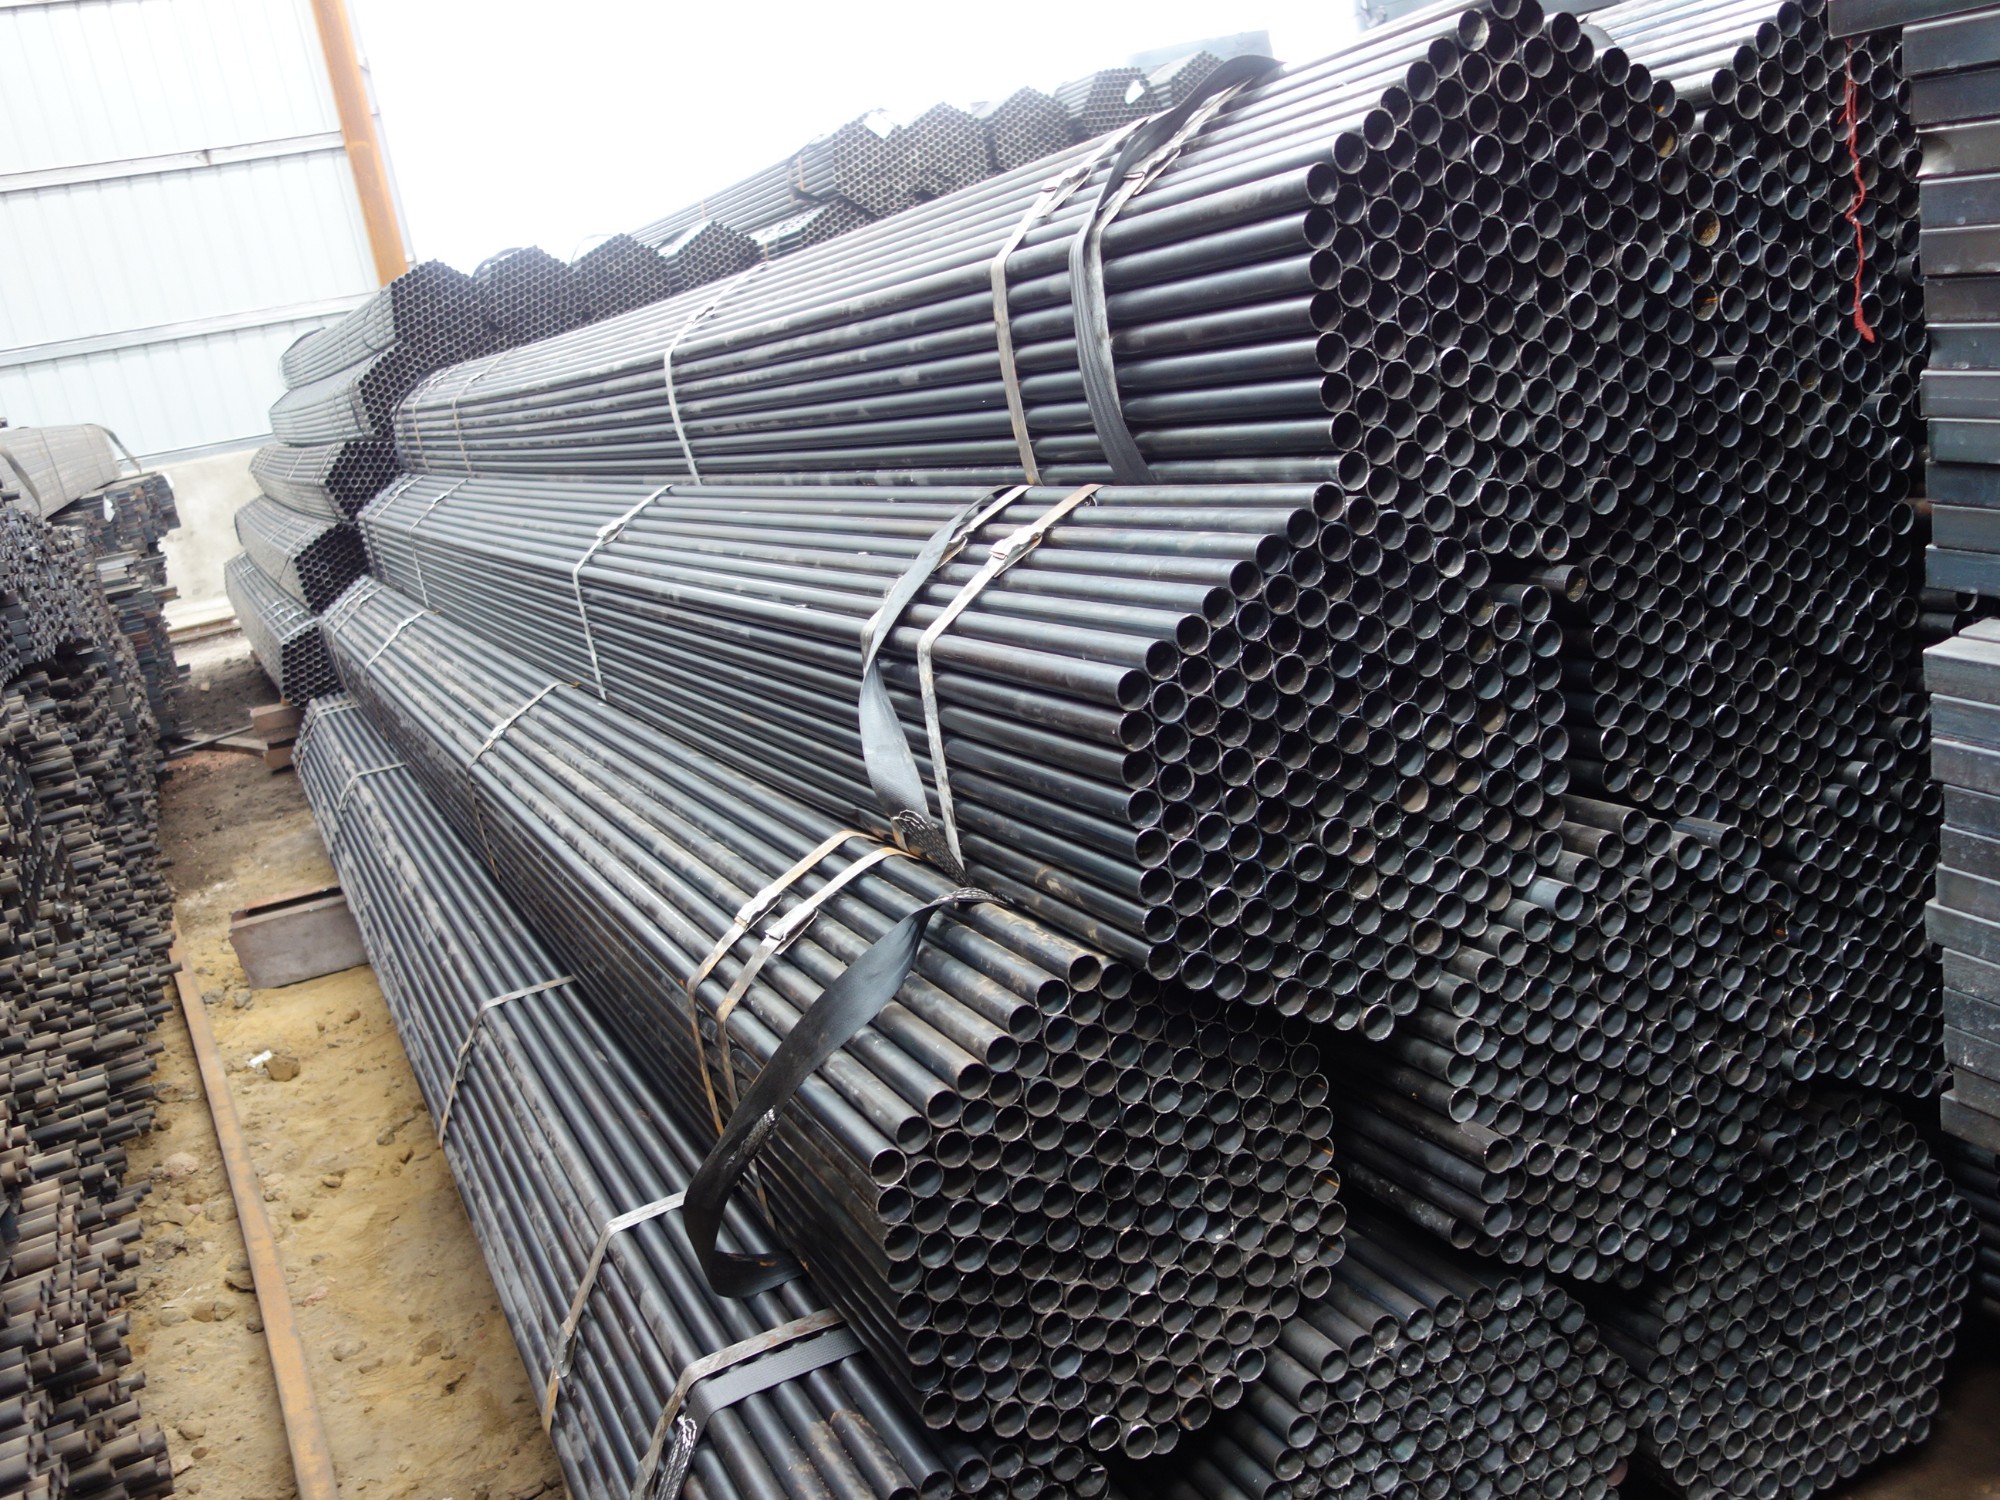 Hot Rolled Pipes Manufacturers, Hot Rolled Pipes Factory, Supply Hot Rolled Pipes